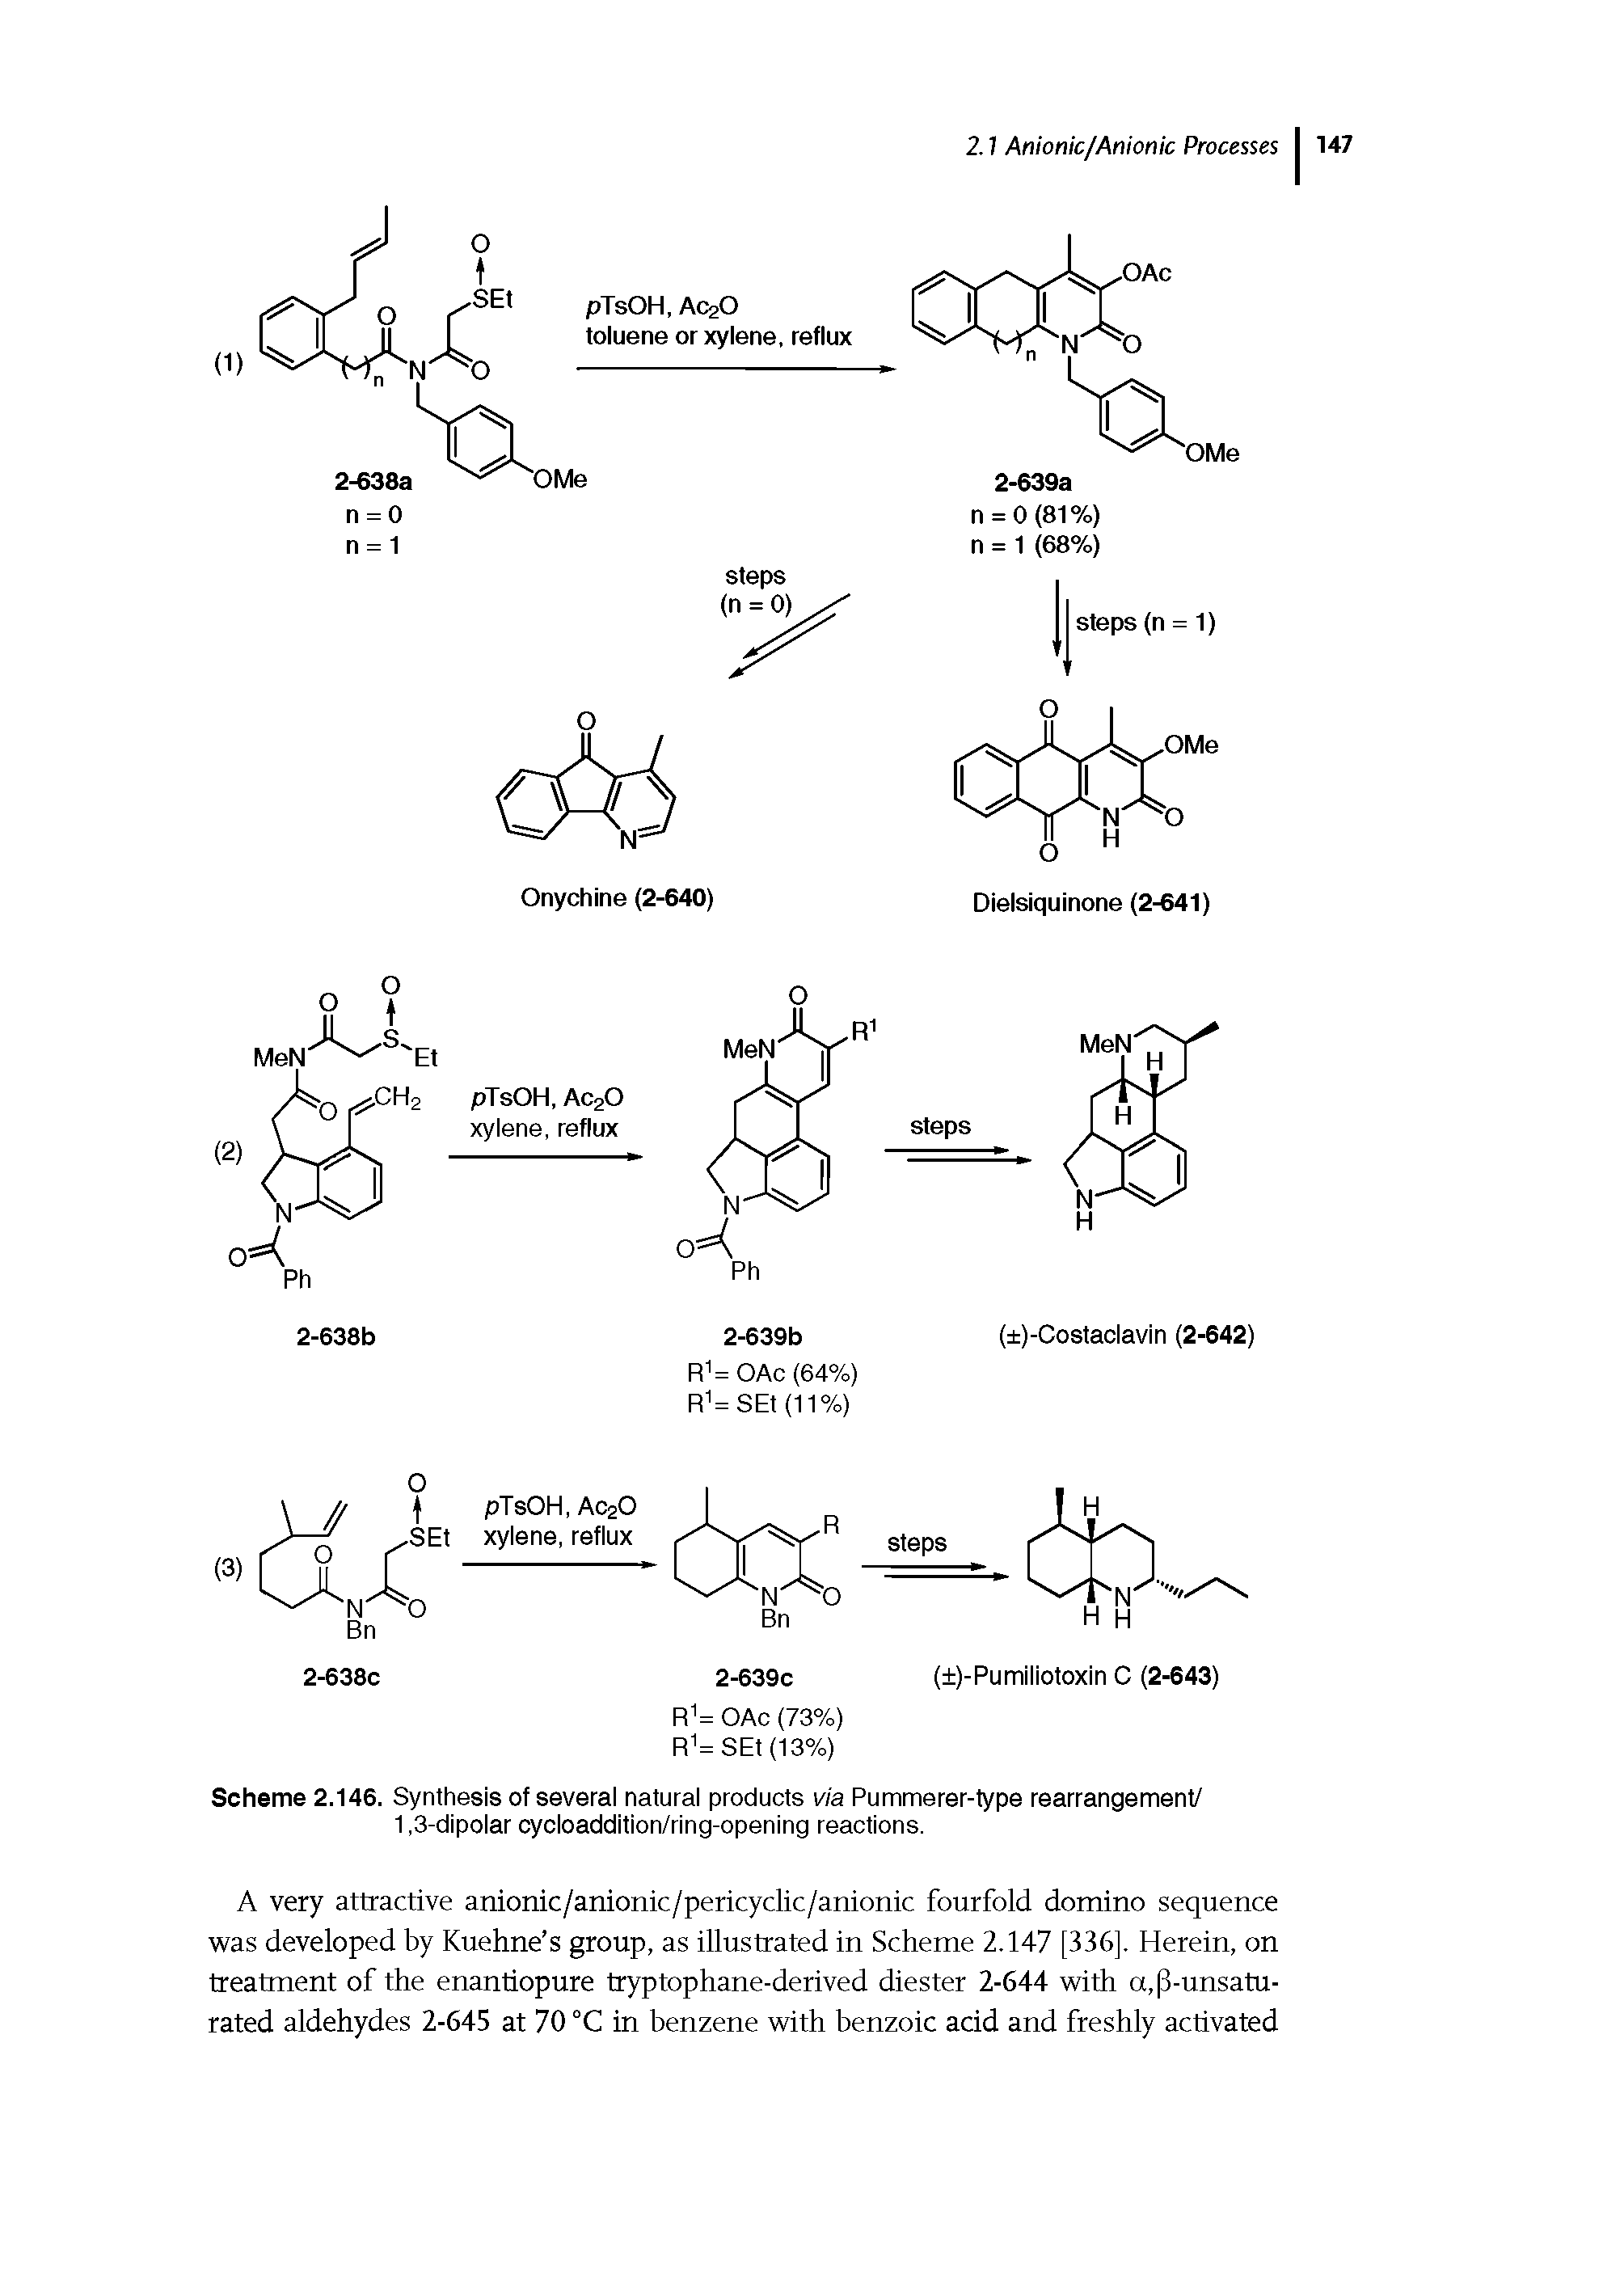 Scheme 2.146. Synthesis of several natural products via Pummerer-type rearrangement/ 1,3-dipolar cycloaddition/ring-opening reactions.